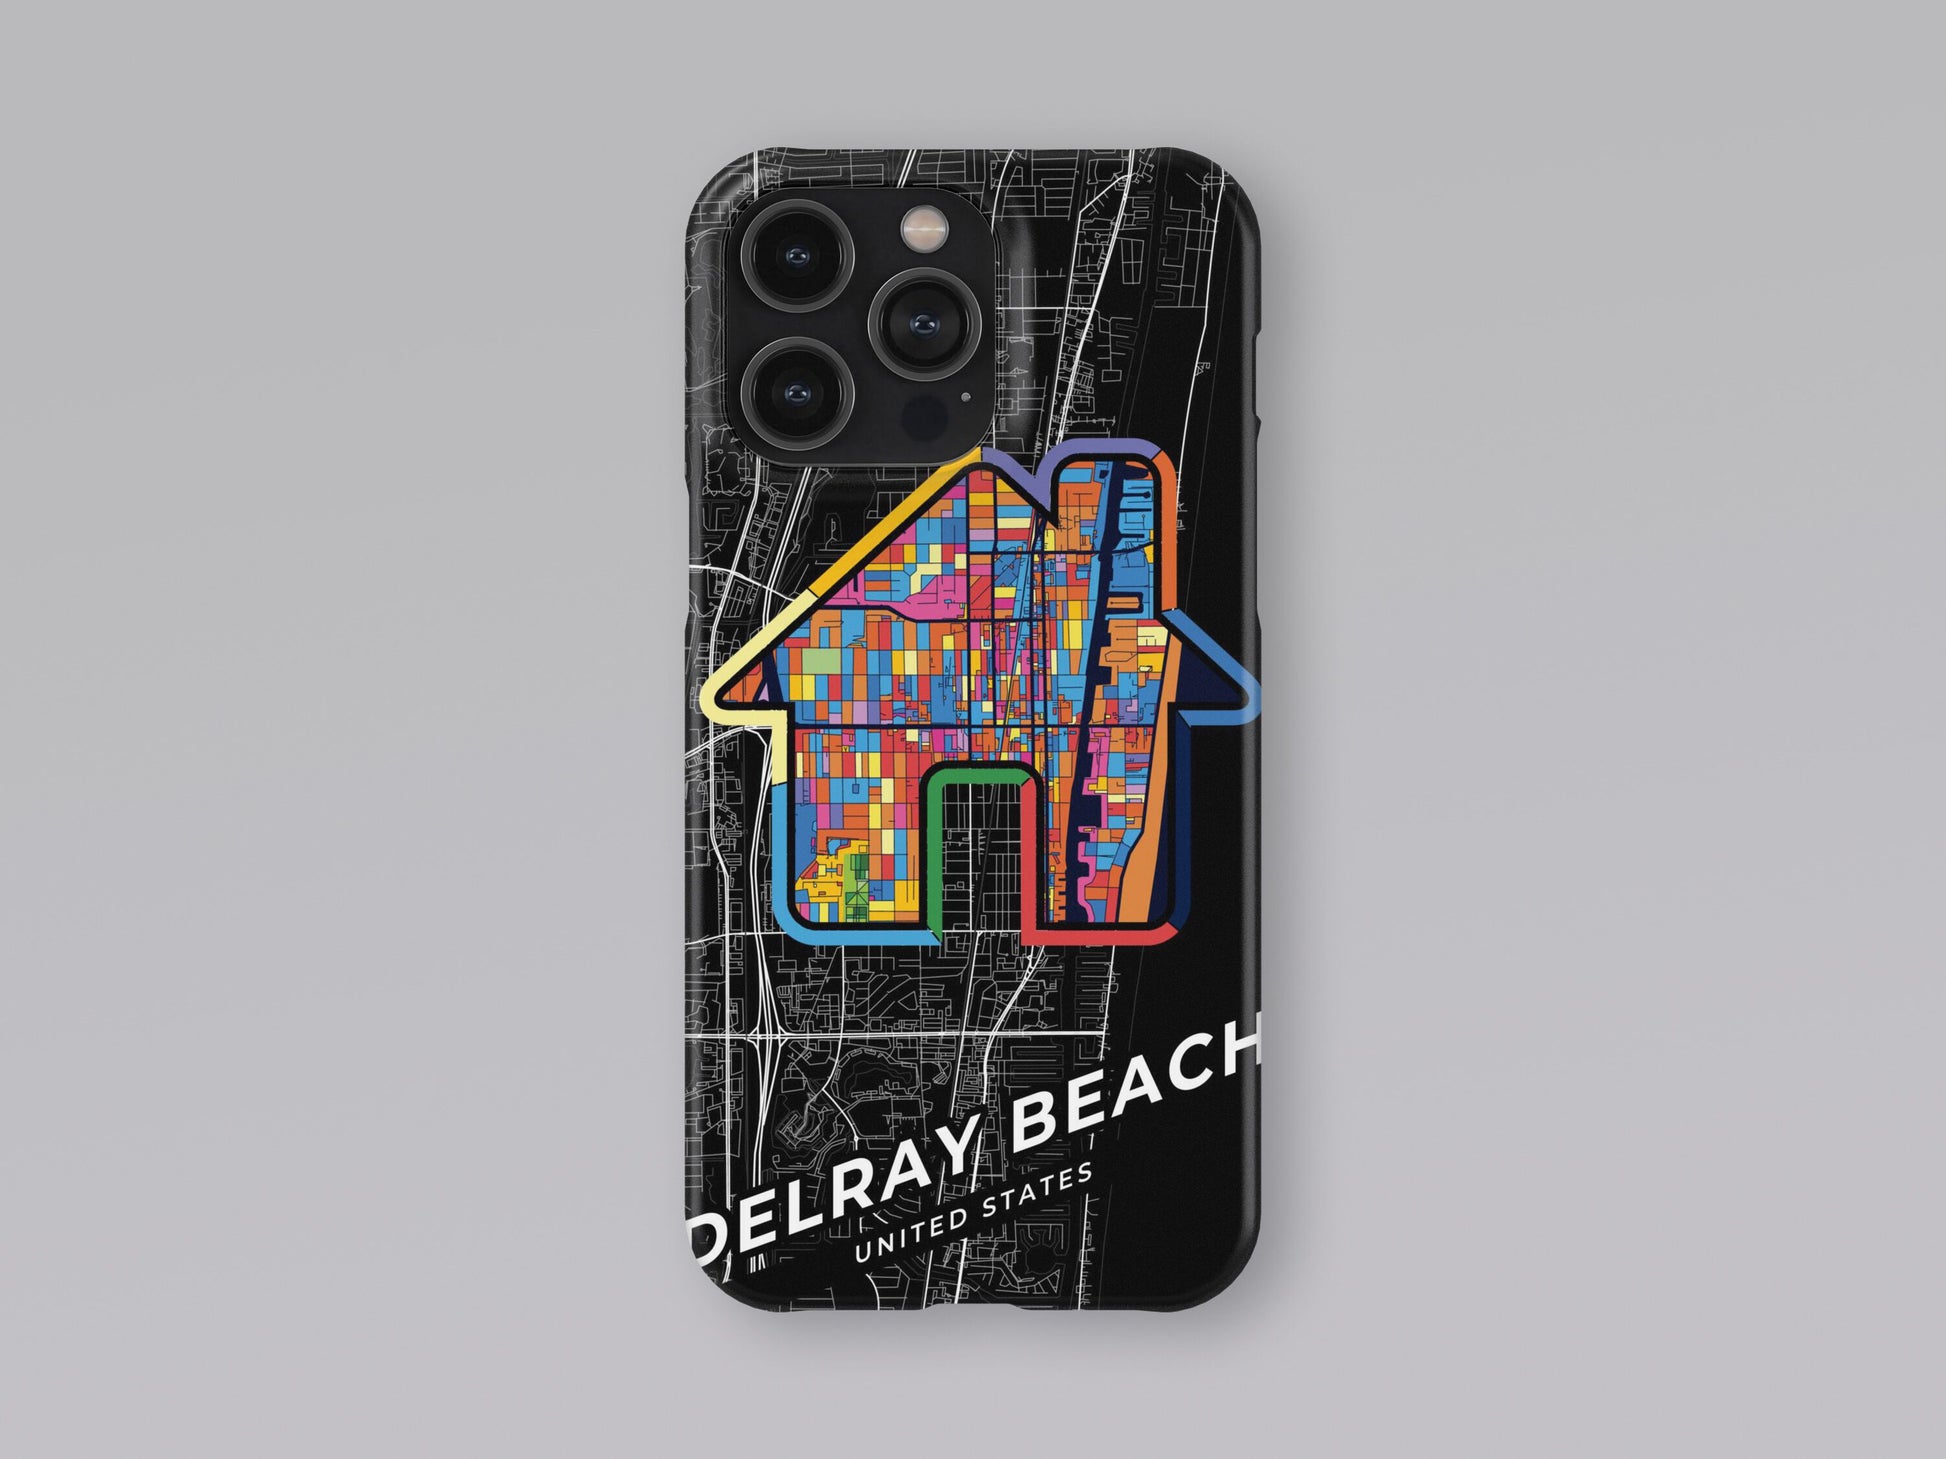 Delray Beach Florida slim phone case with colorful icon. Birthday, wedding or housewarming gift. Couple match cases. 3